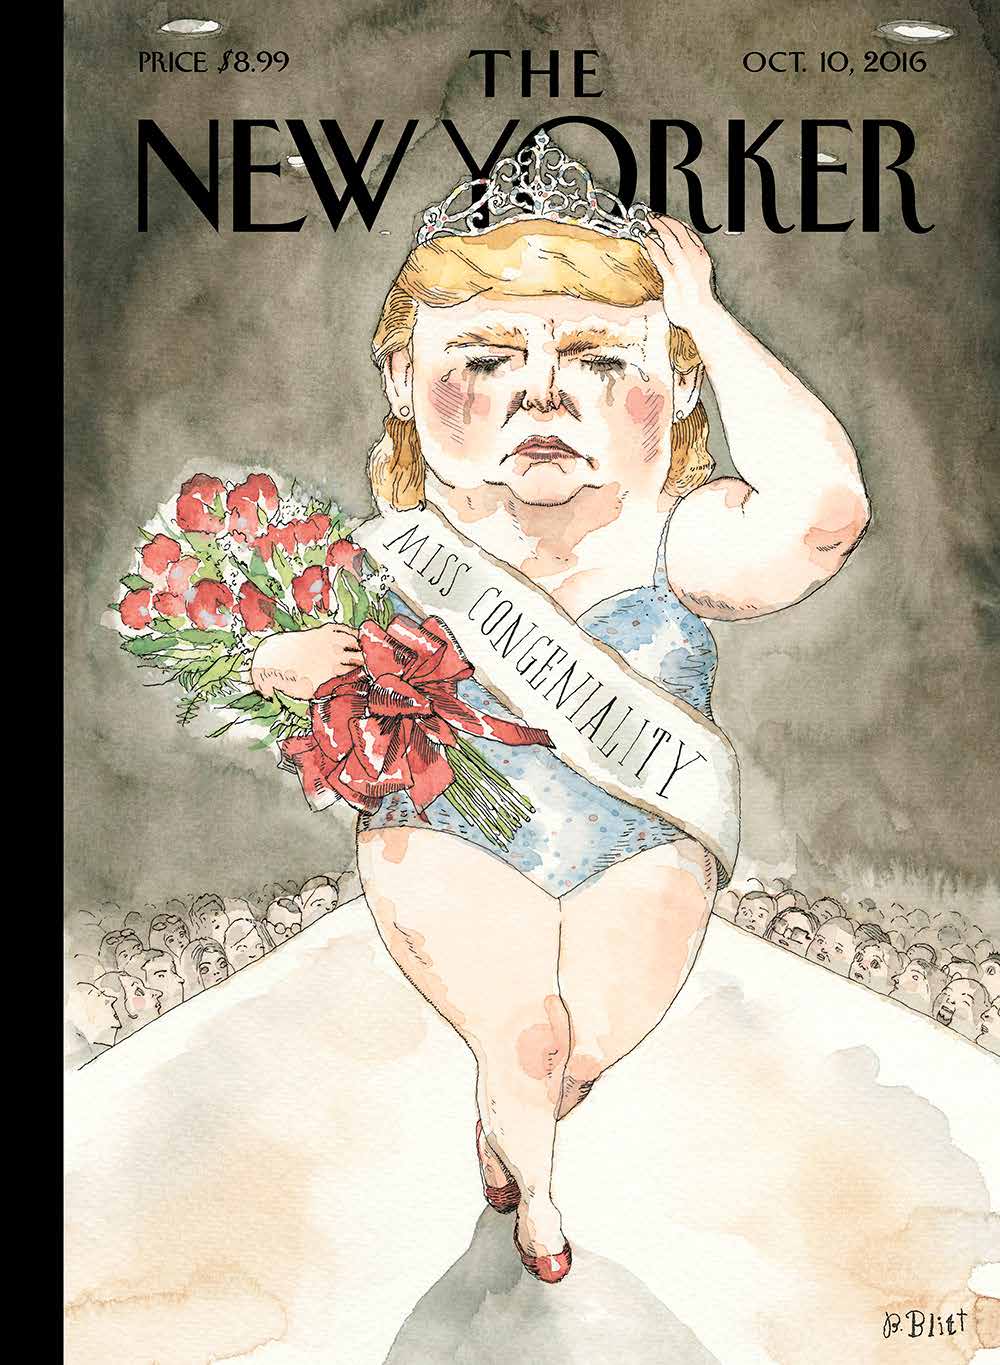 The New Yorker - "Miss Congeniality," October 10